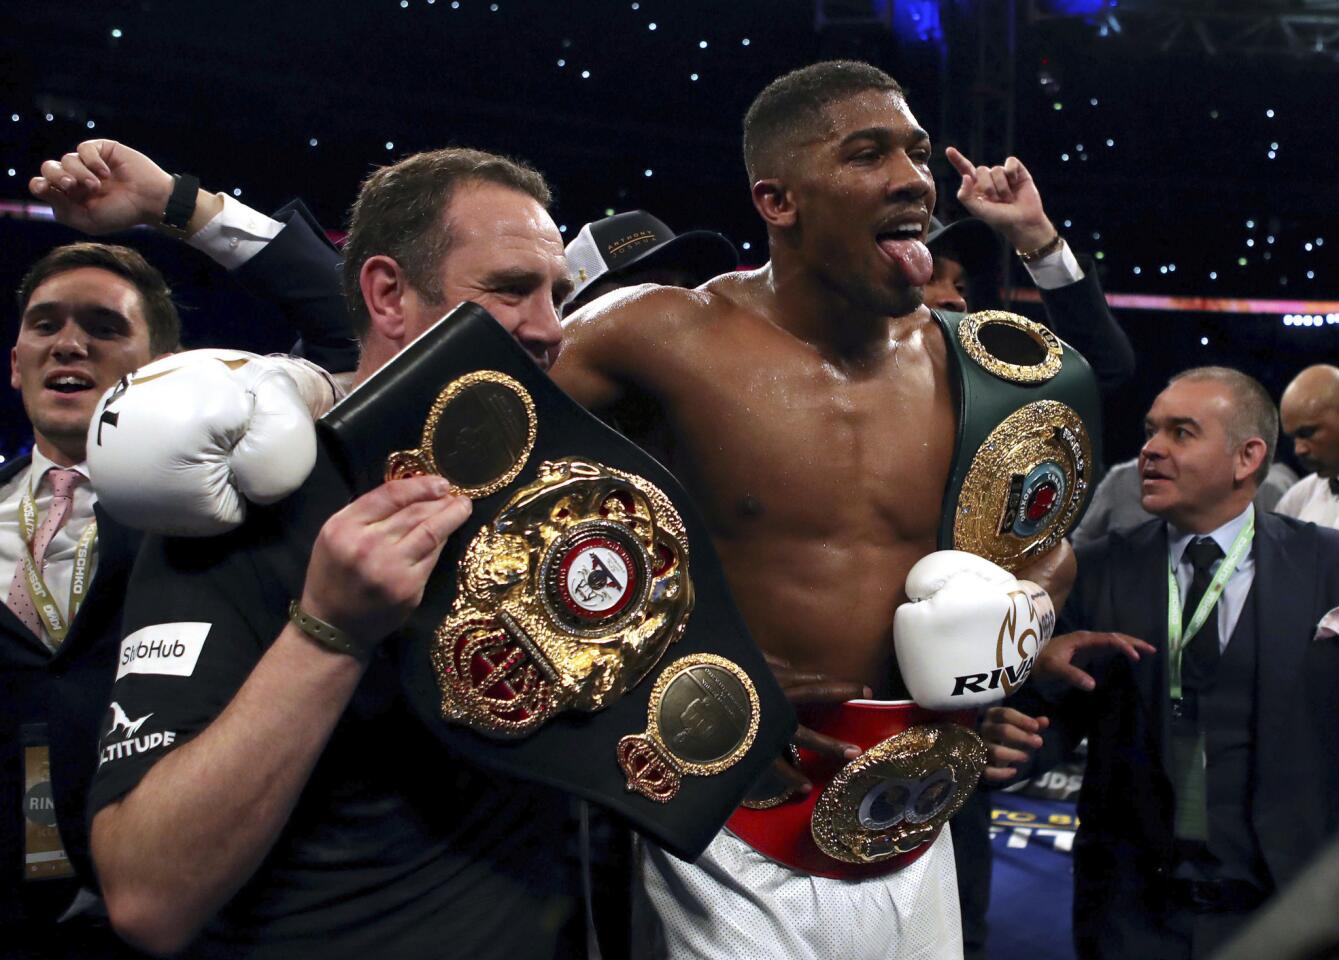 Anthony Joshua of Britain celebrates after defeating Wladimir Klitschko of Ukraine by technical knockout for the heavyweight title.